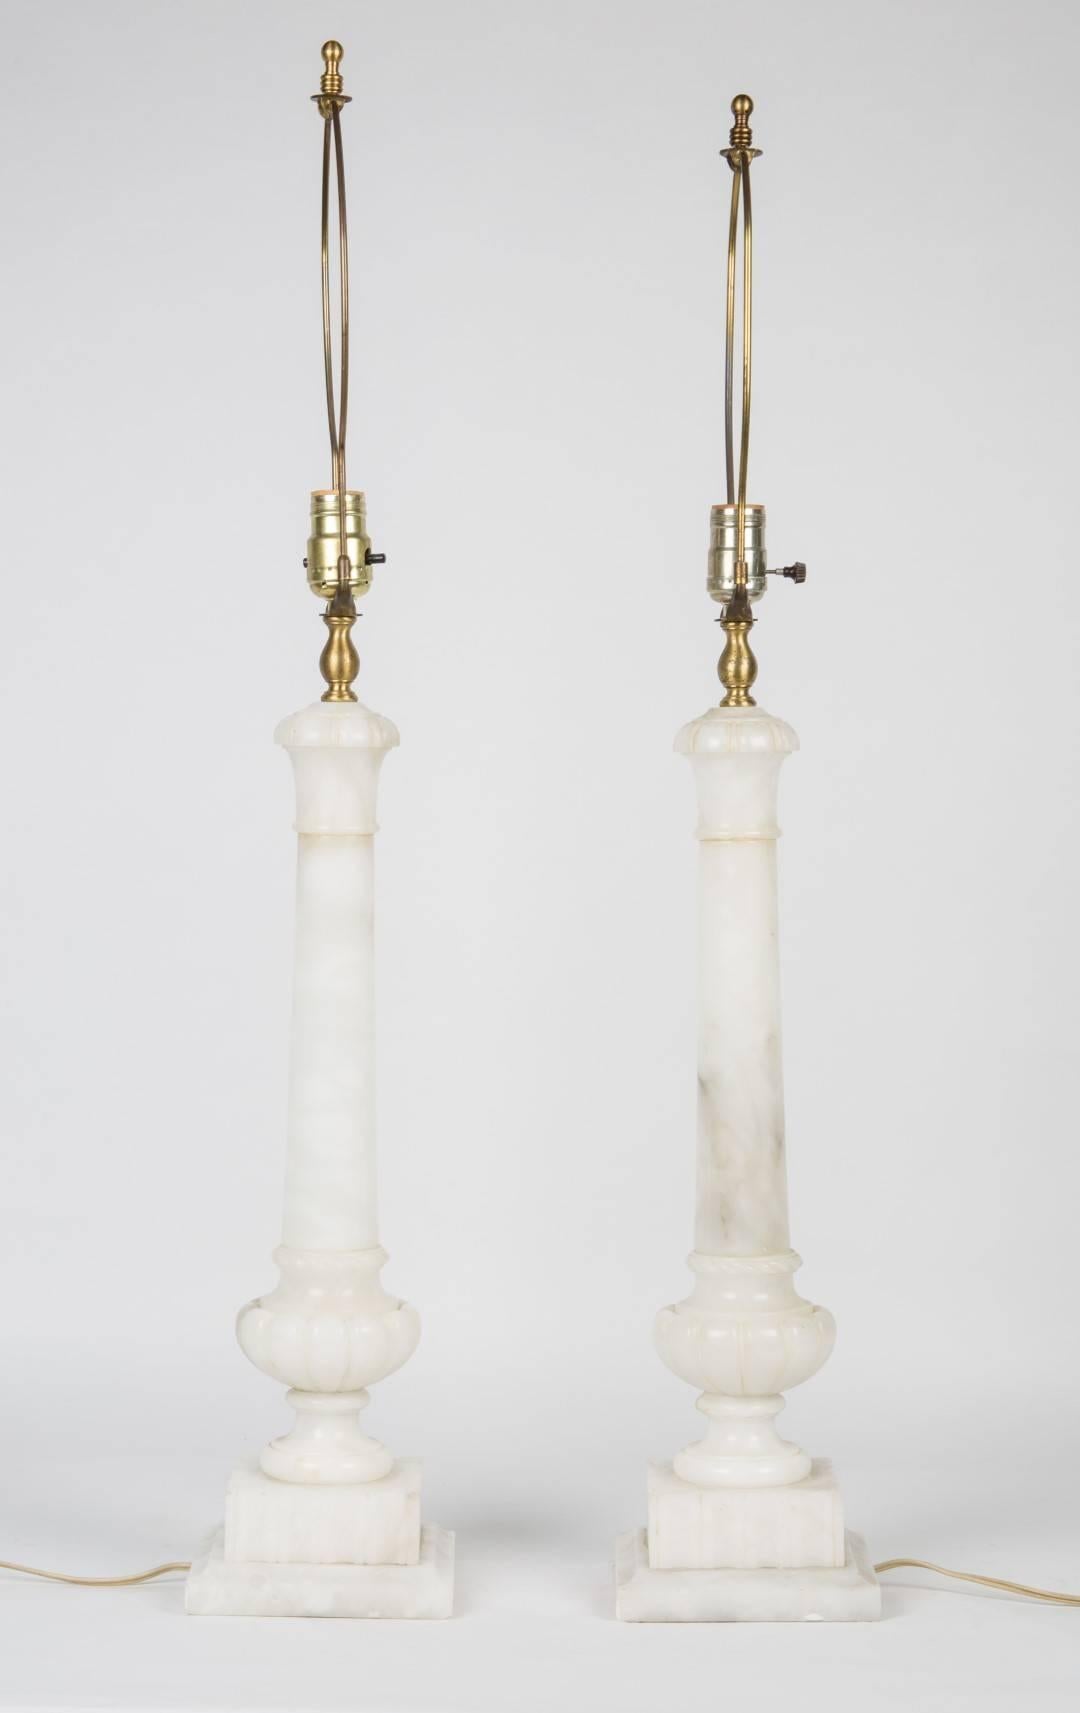 Grand Tour Pair of Neoclassical Alabaster Columns Mounted as Lamps